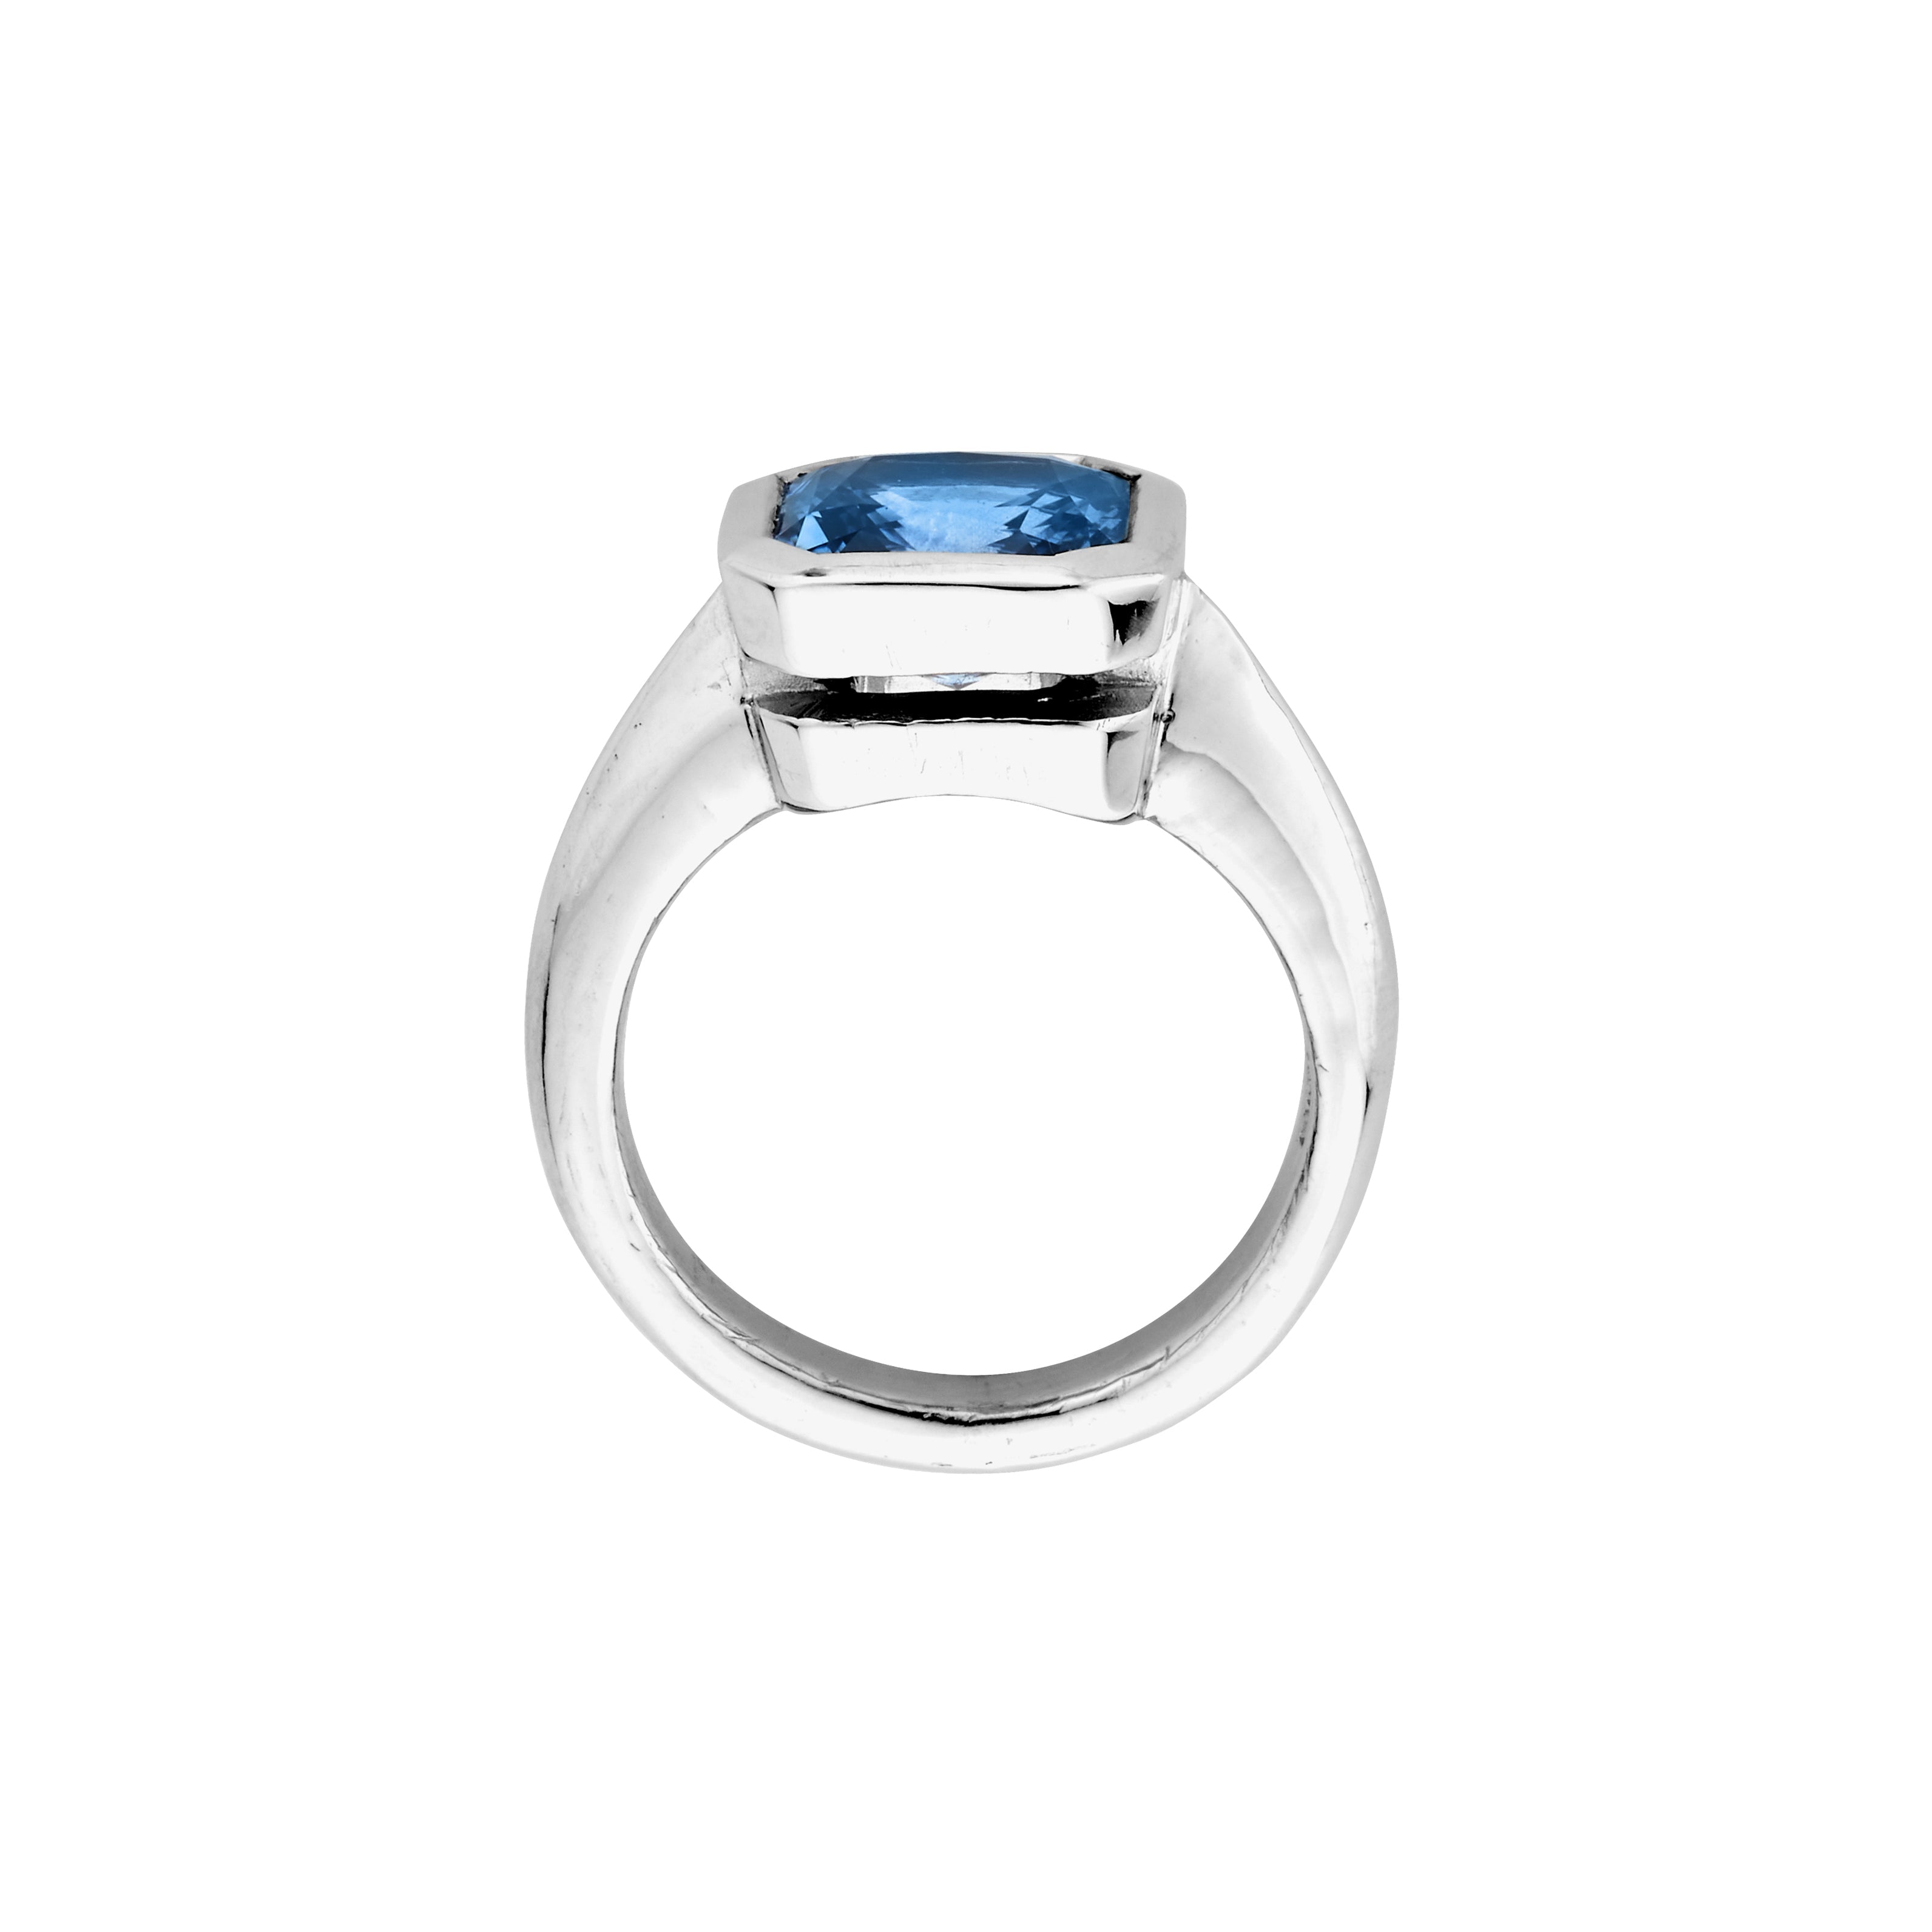 RUM White Gold Square Blue Sapphire Ring